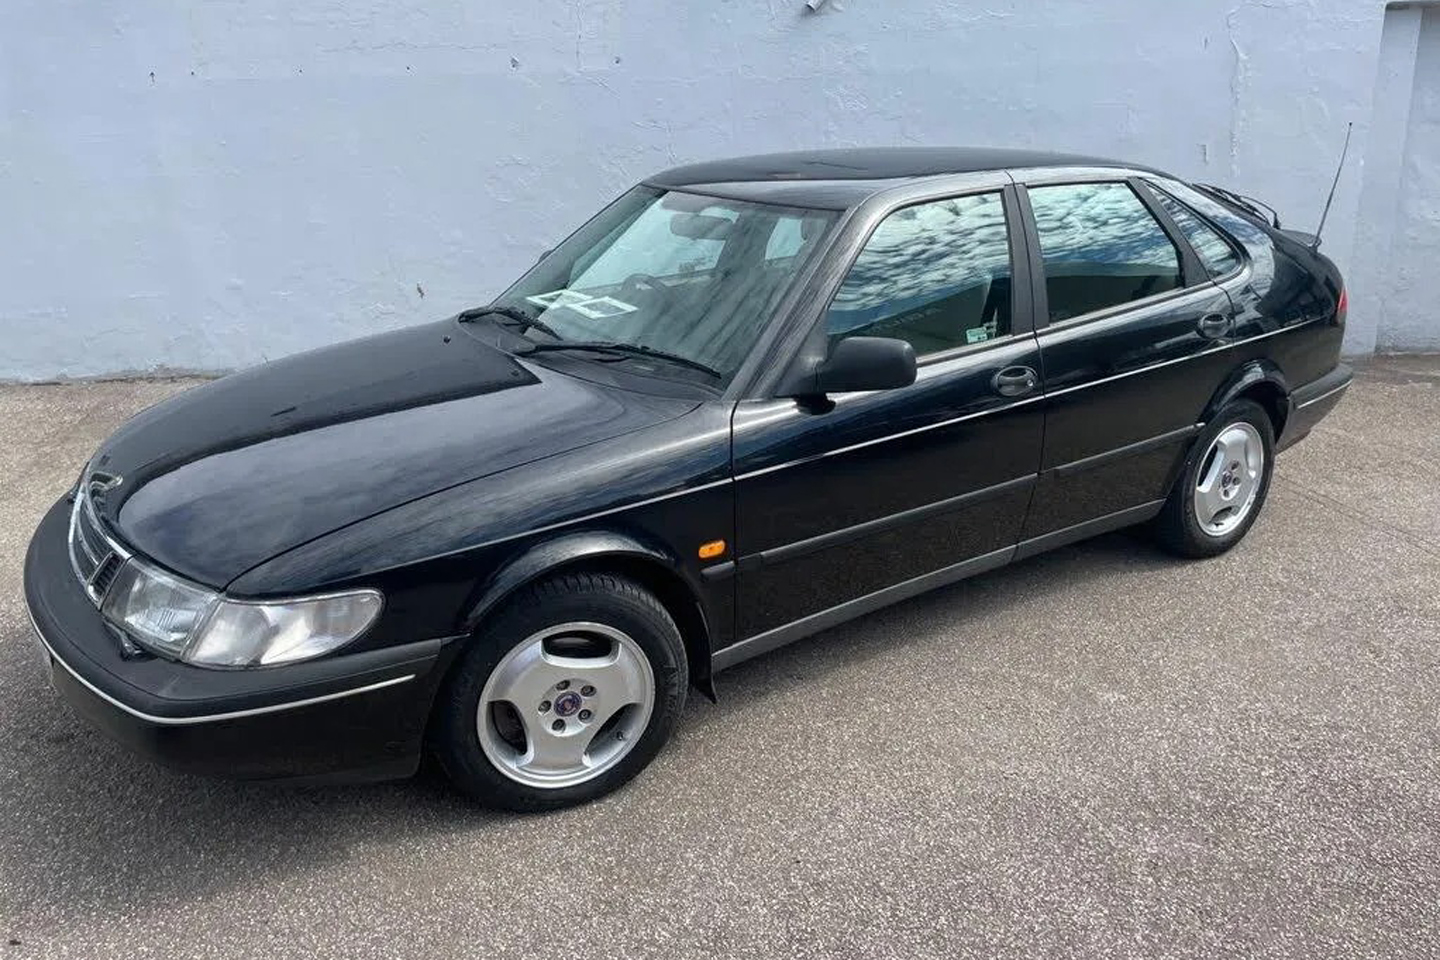 Saab 900 S | Shed of the Week